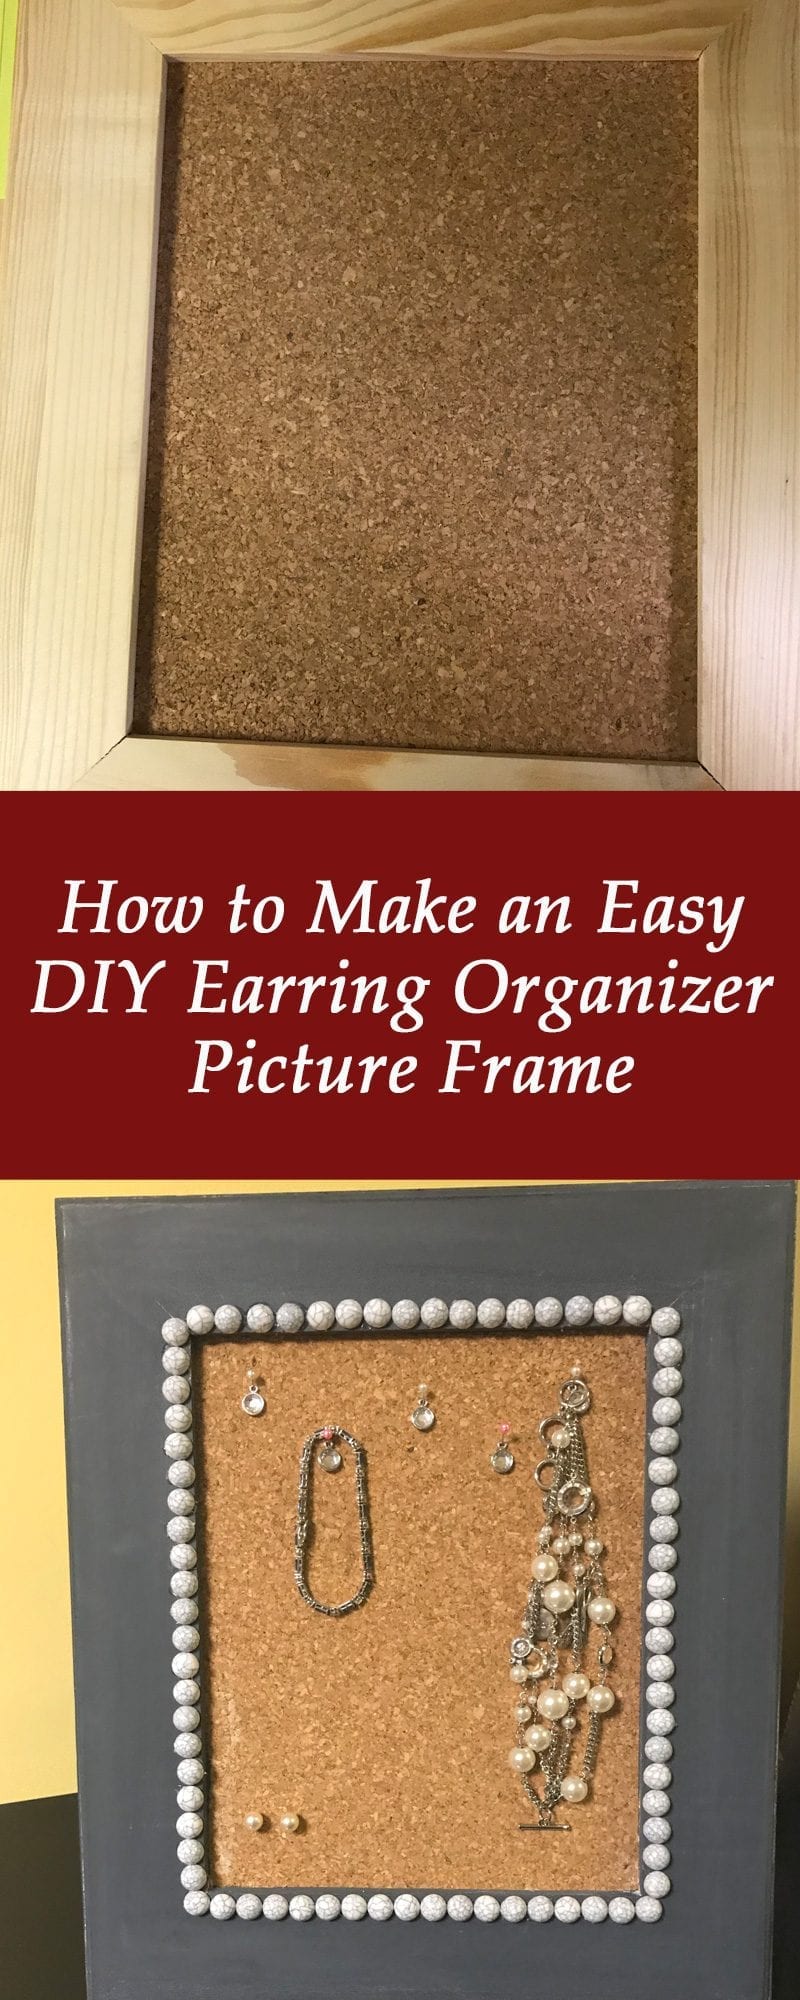 Easy DIY Earring Organizer Picture Frame